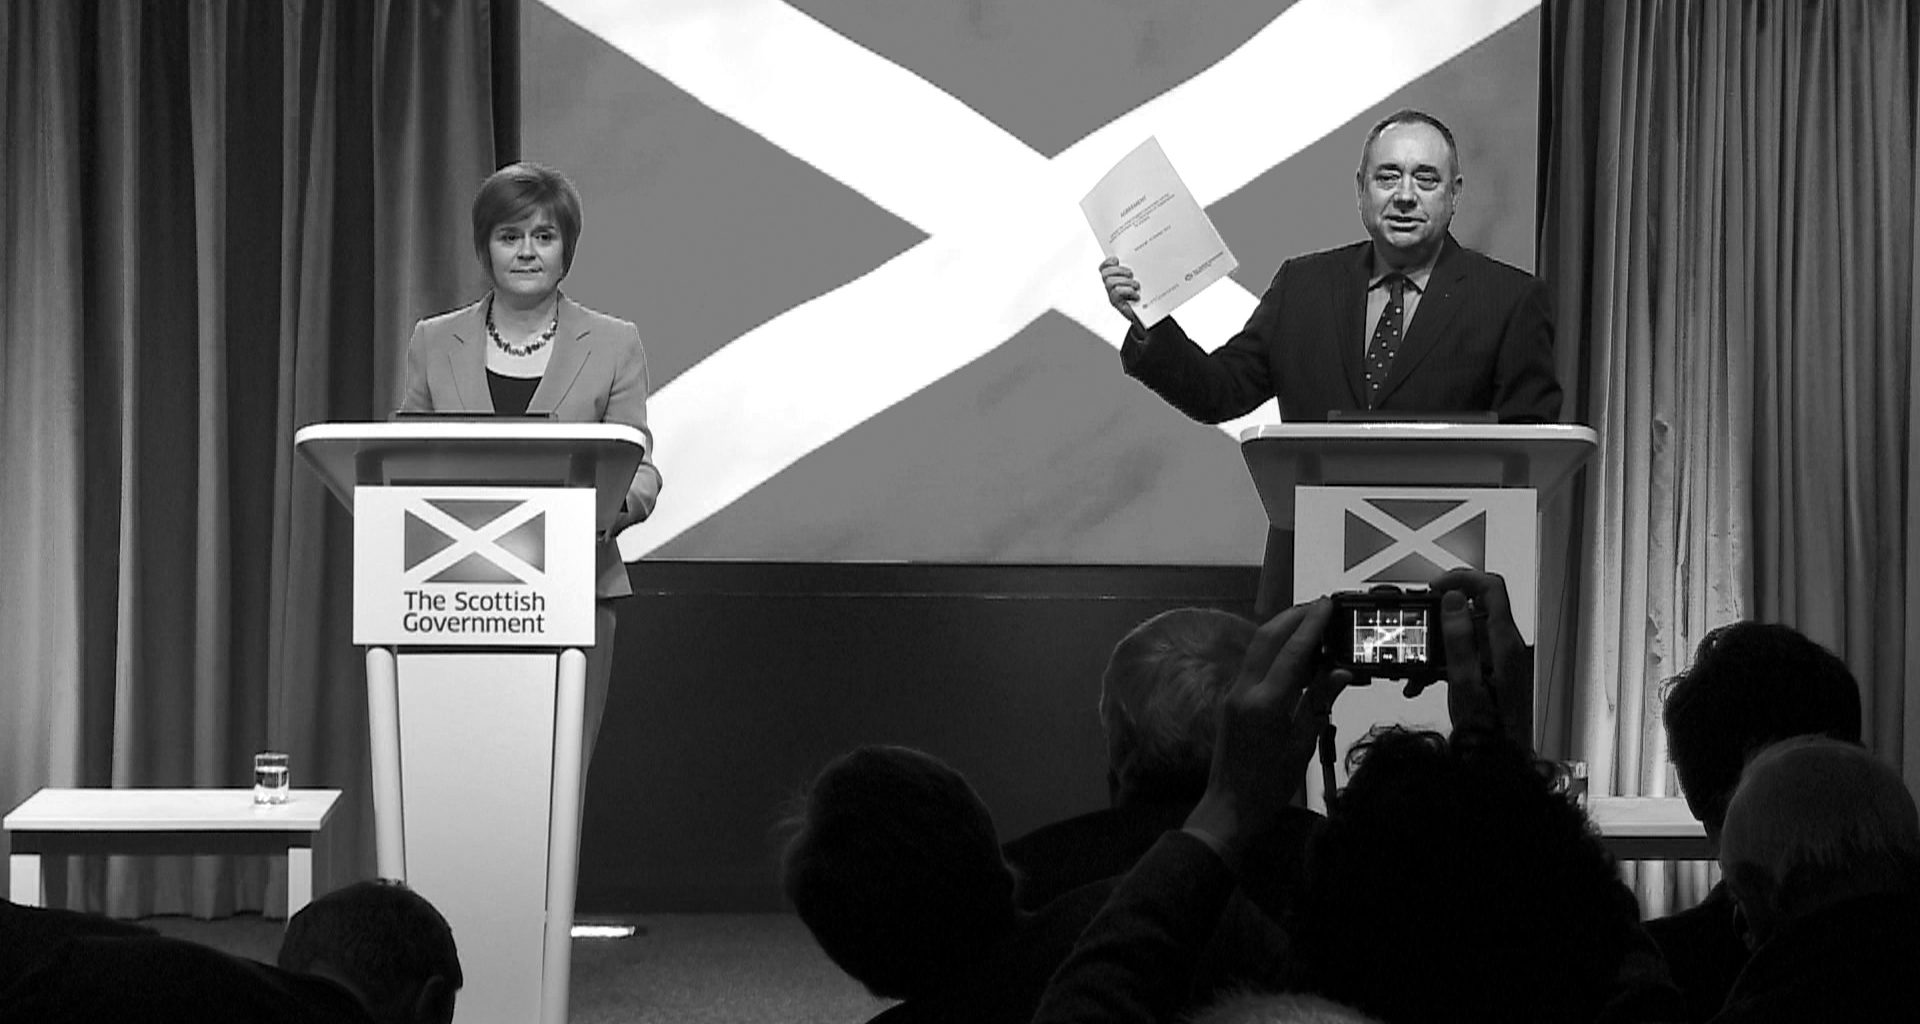 FFS explains: Alex Salmond's committee appearance 3